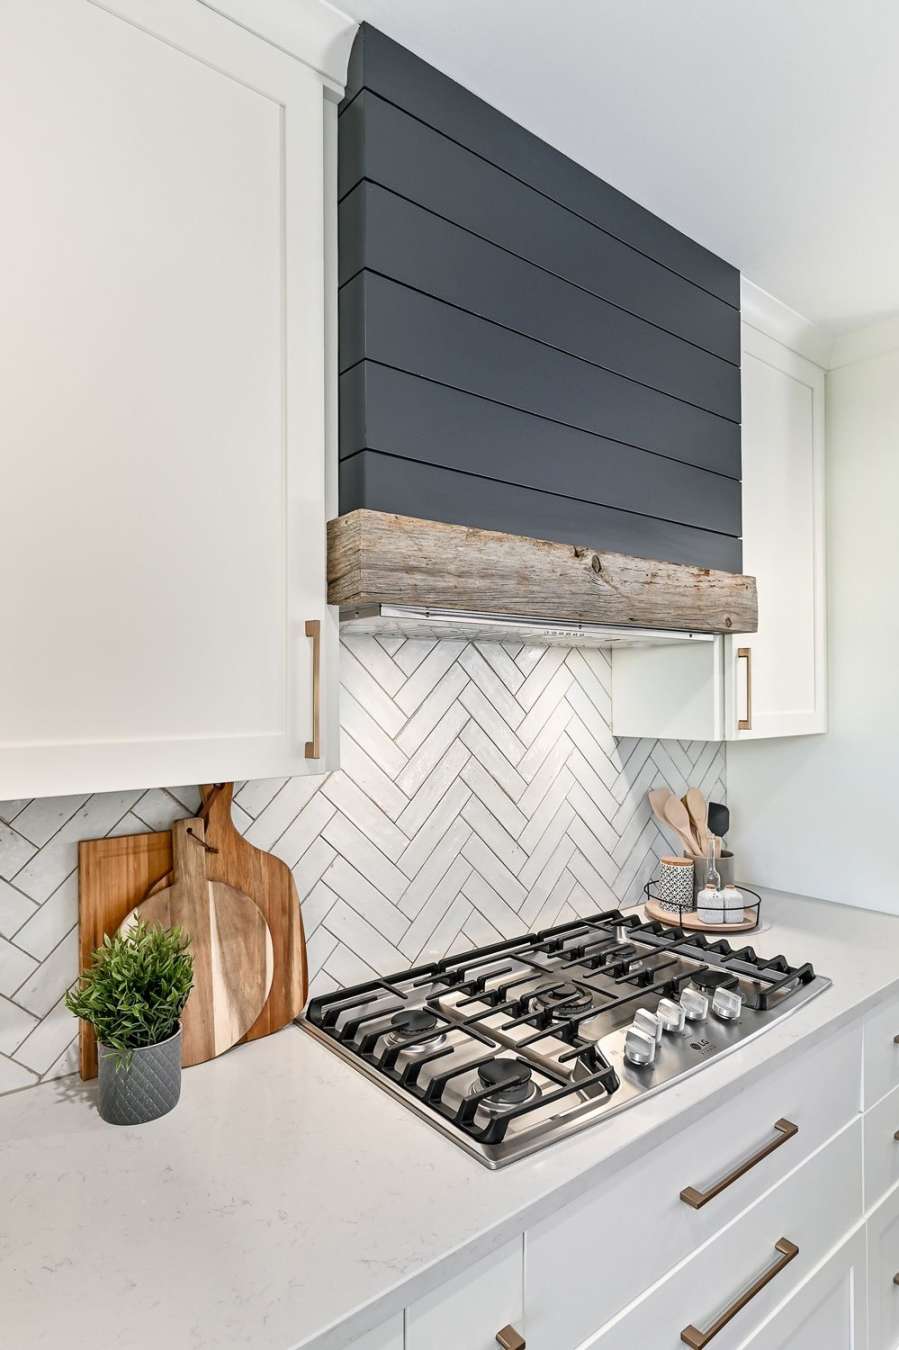 Backsplash Tile Ideas: From Bold to Traditional